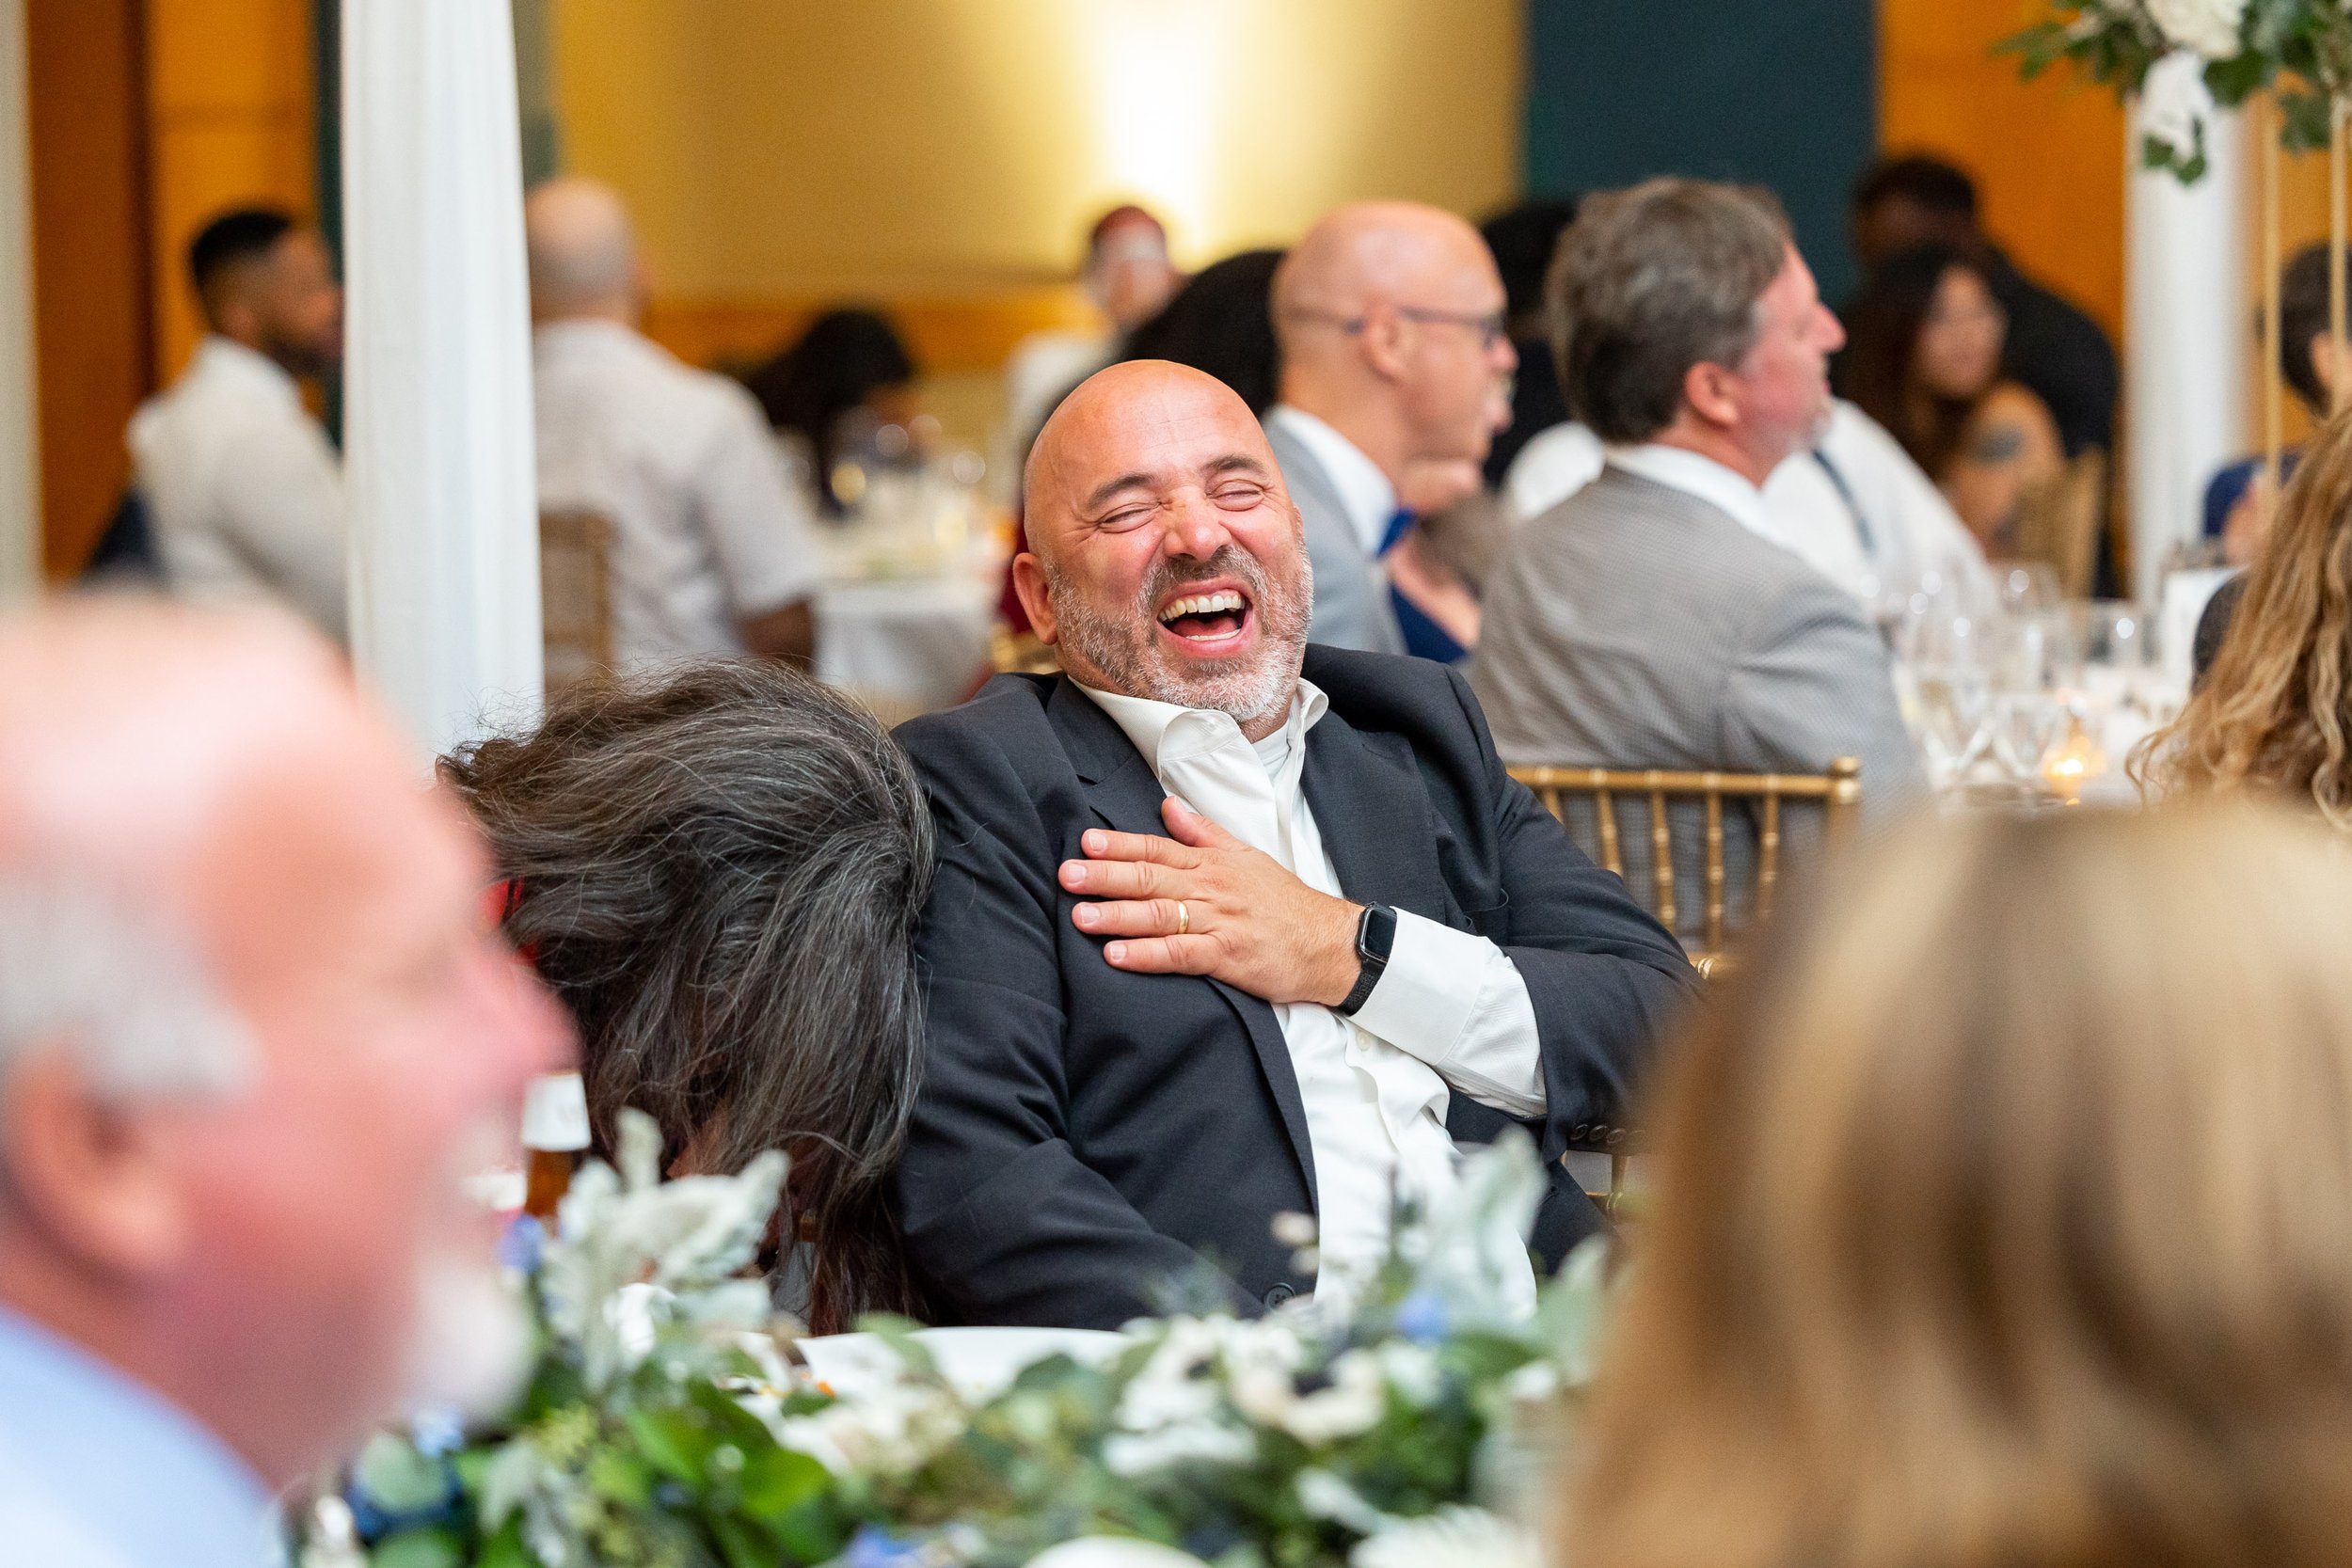 Guests laugh at the best man's funny speech to the groom